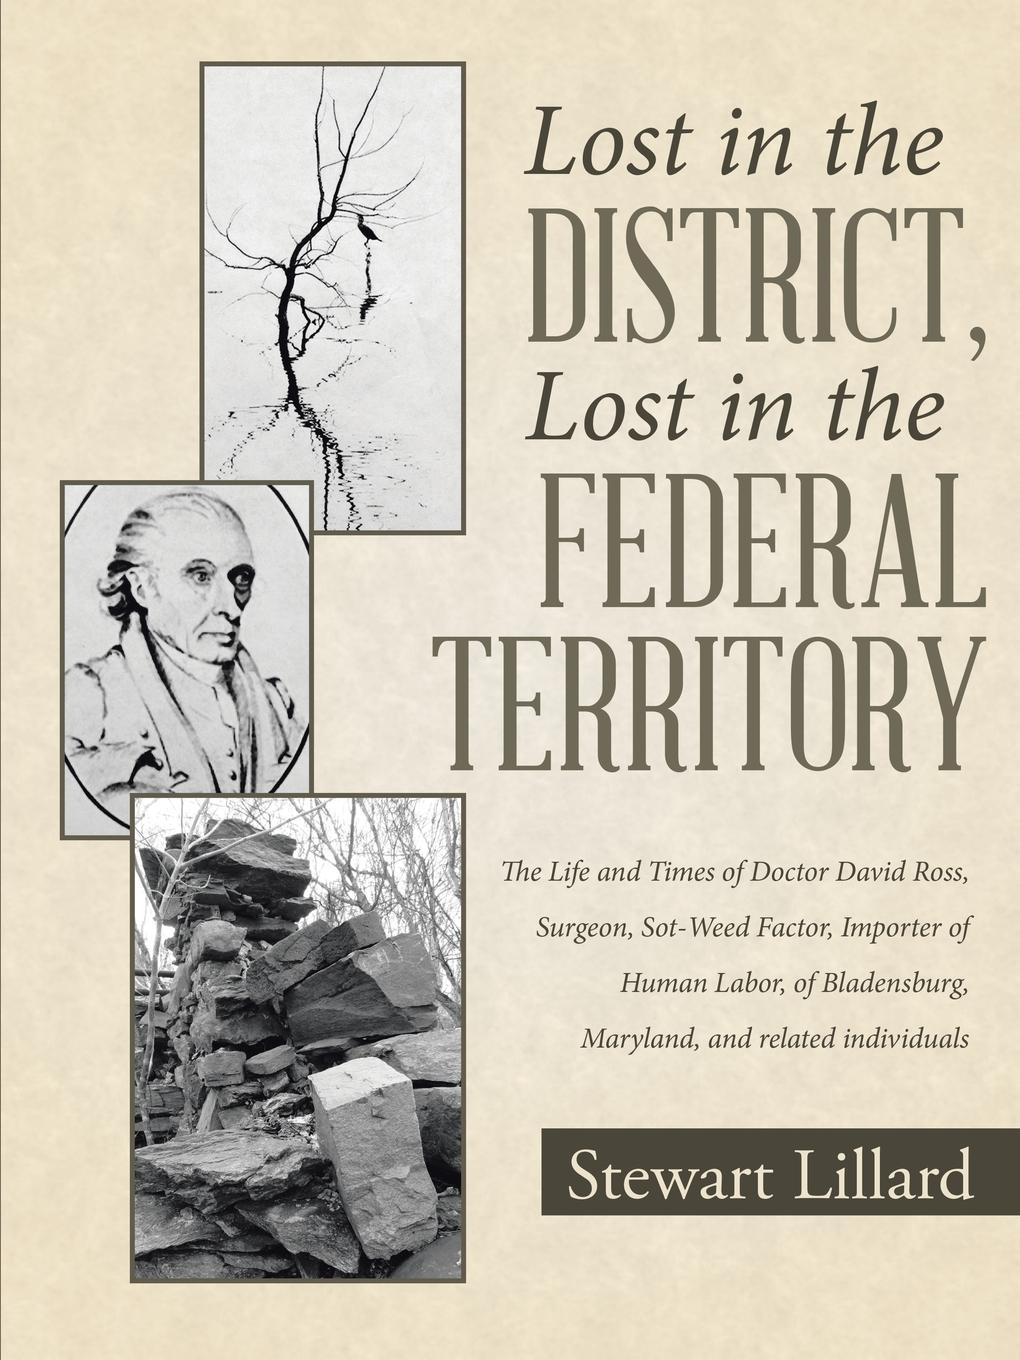 Lost in the District, Lost in the Federal Territory. The Life and Times of Doctor David Ross, Surgeon, Sot-Weed Factor, Importer of Human Labor, of Bladensburg, Maryland, and related individuals